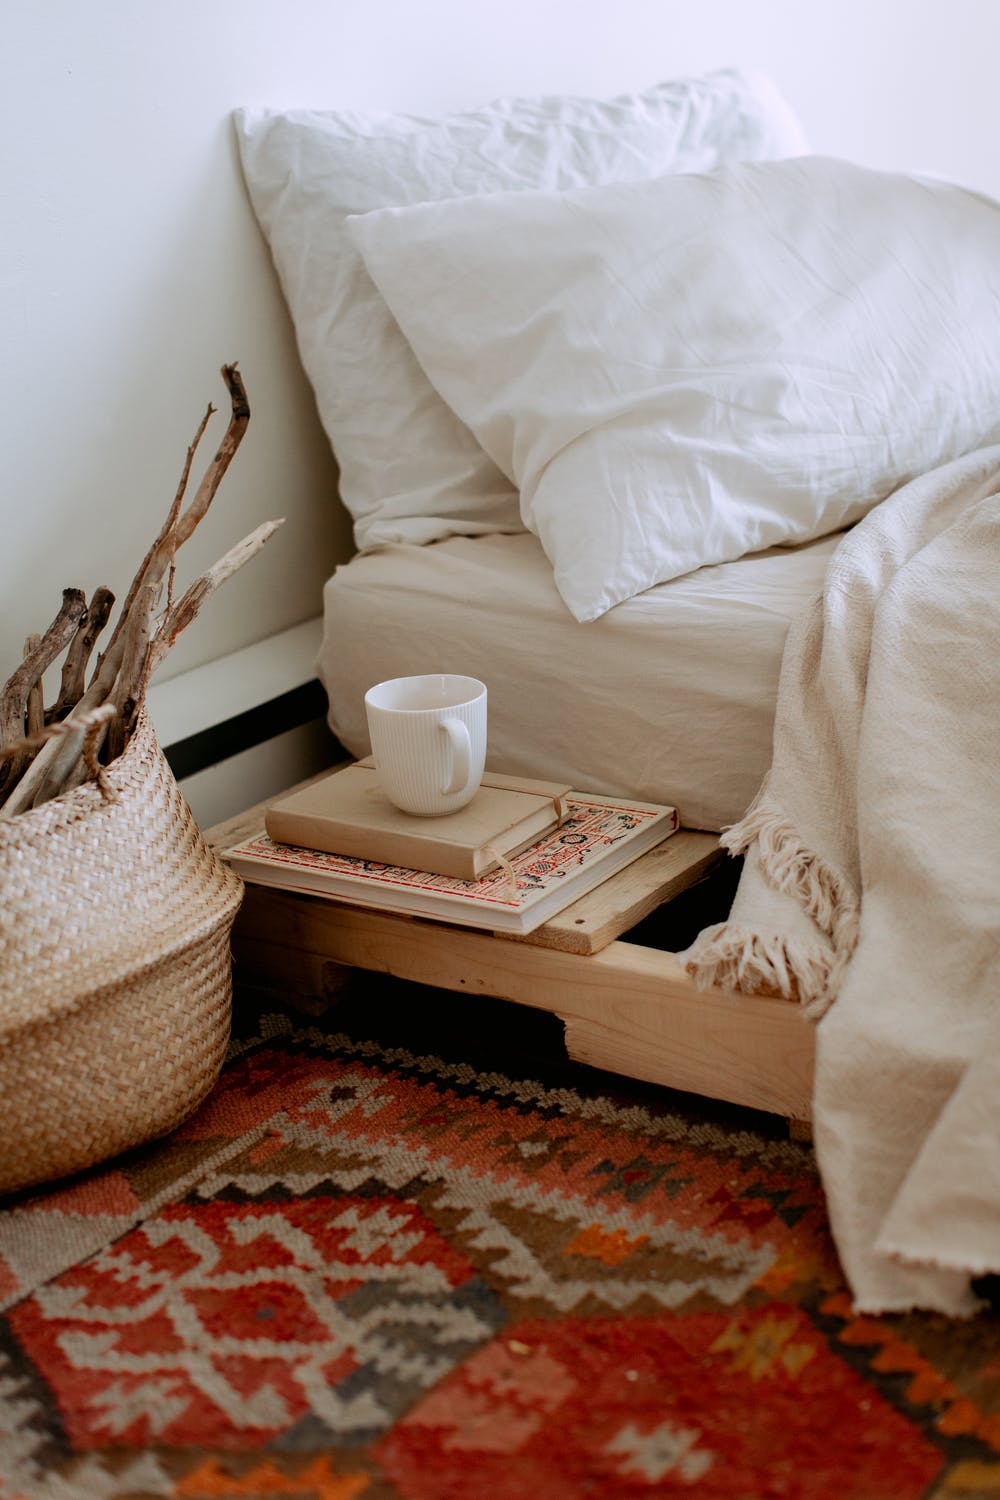 Beautiful kilim of red, orange, and brown beside a bed and woven basket.